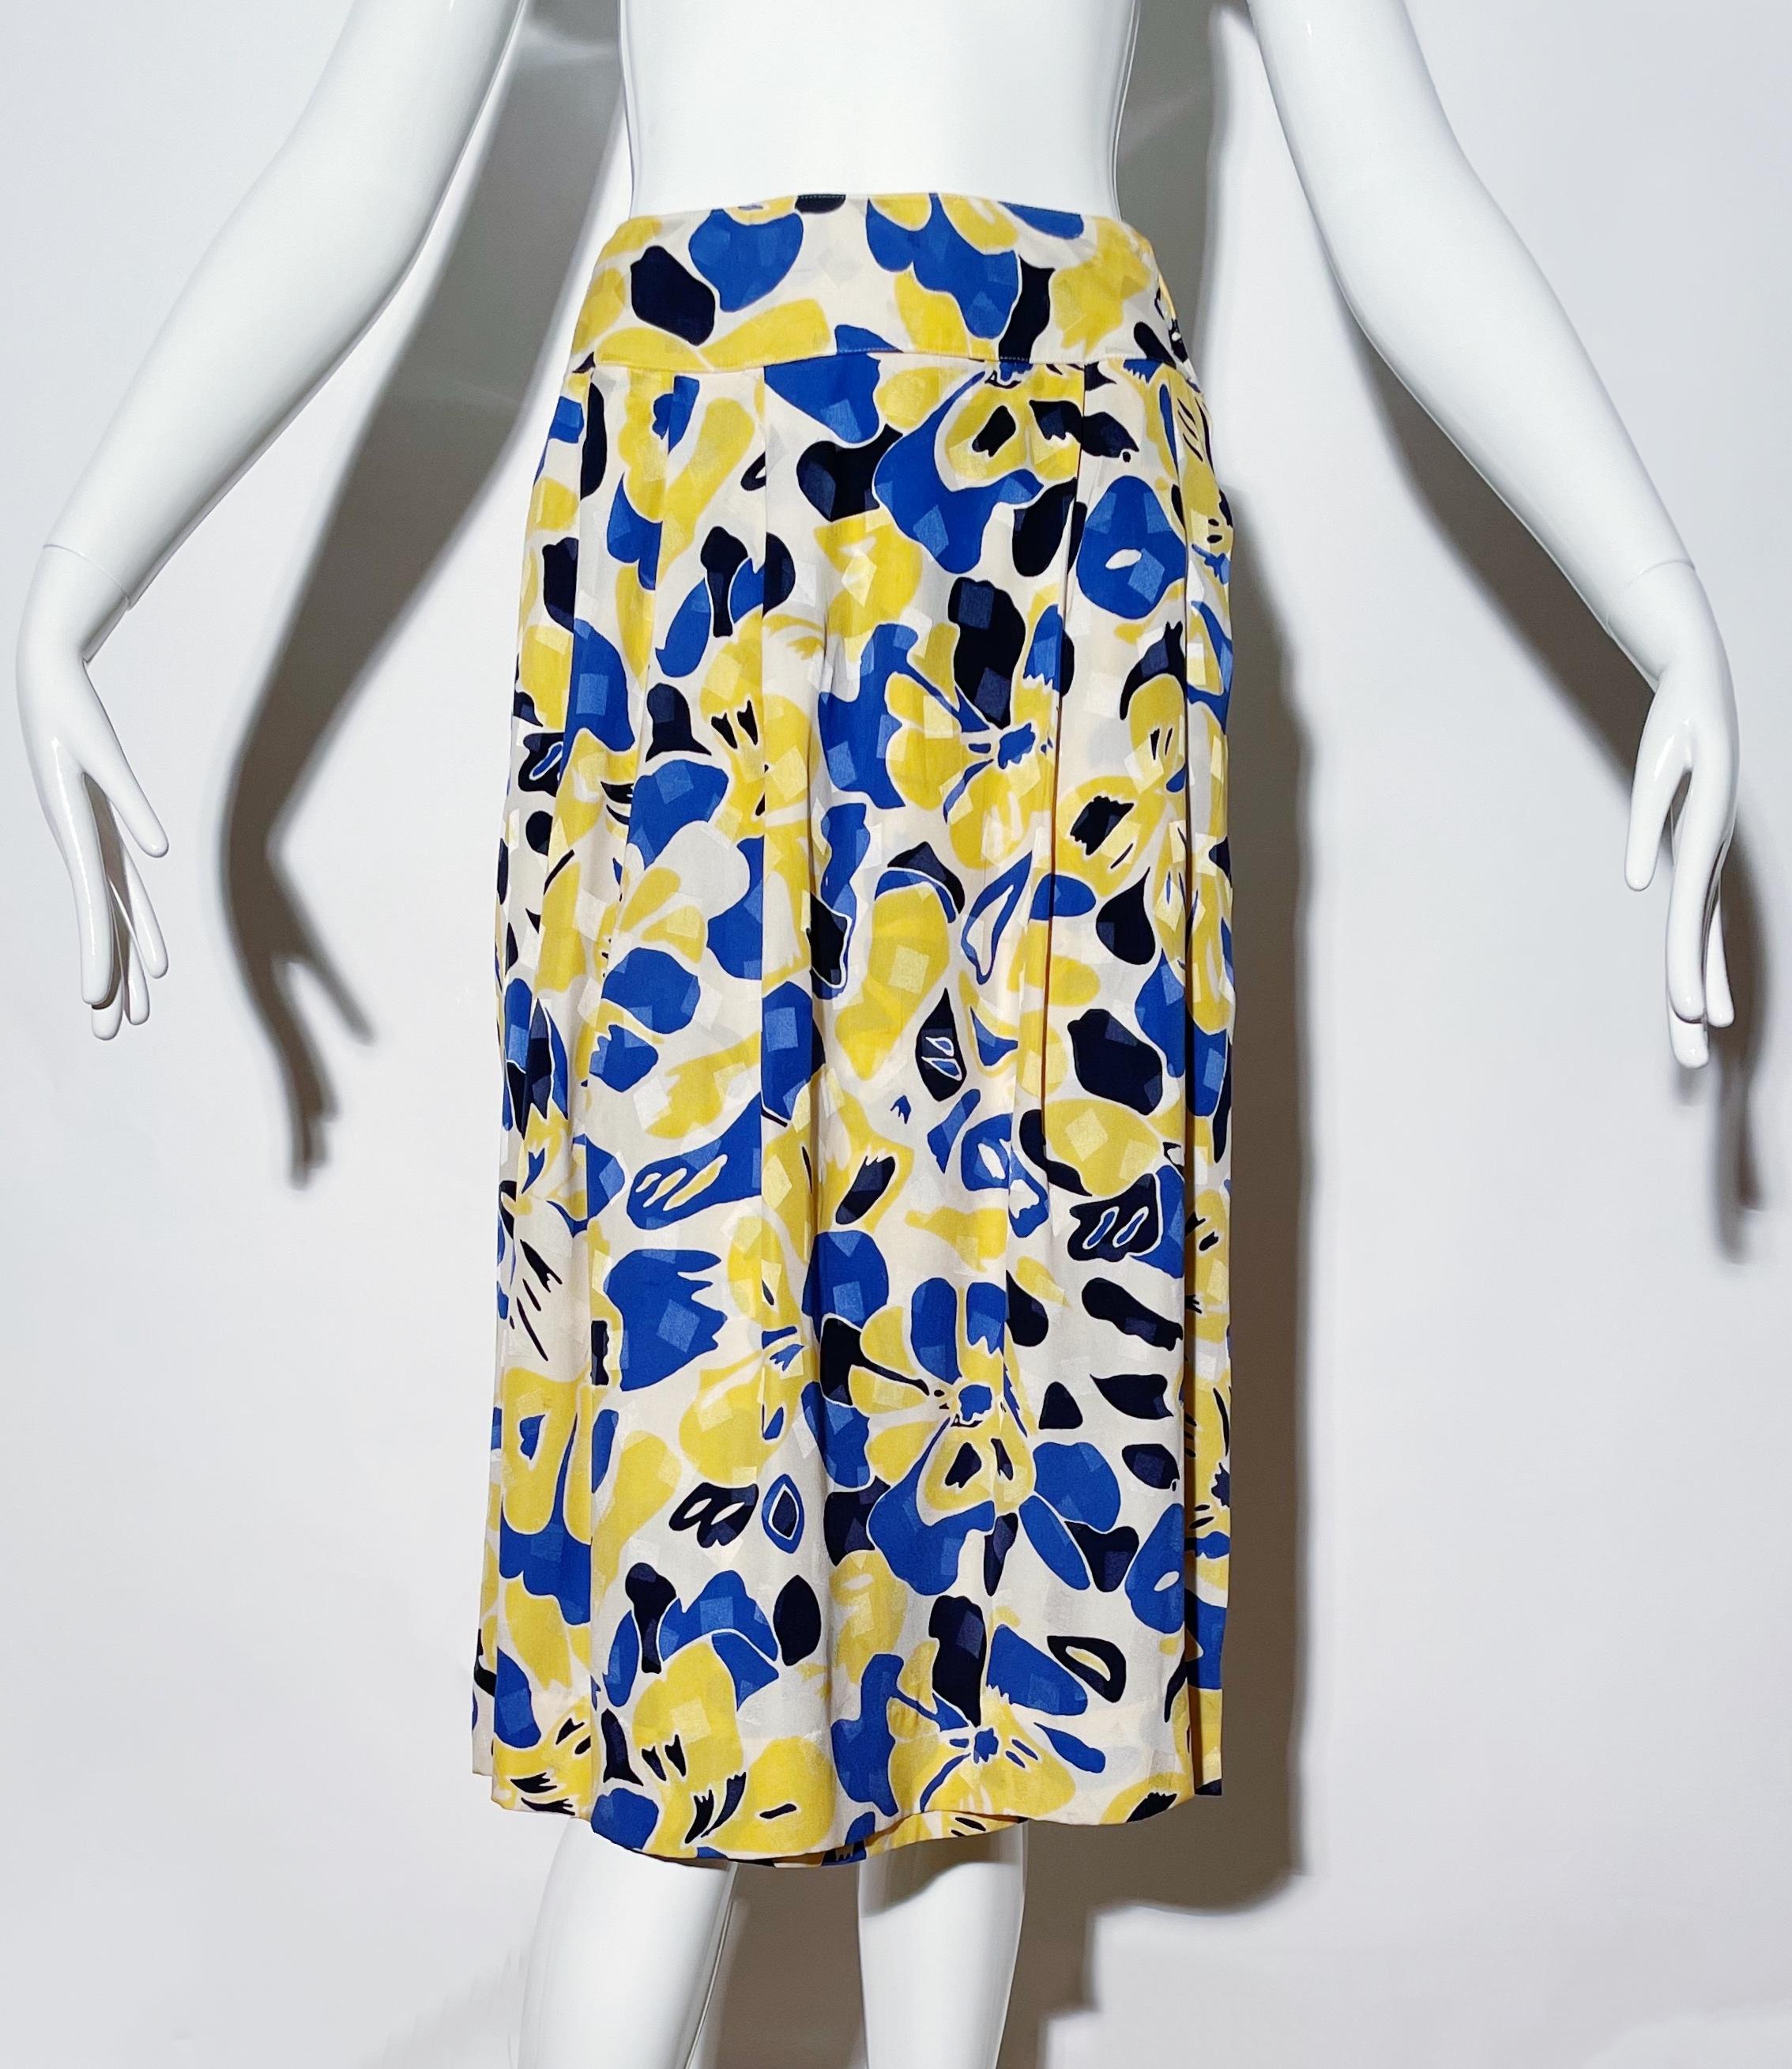 Yellow floral skirt. Pleated. Side button closure. Side pockets. Silk. Made in Korea. 
*Condition: Excellent vintage conditioning. No visible flaws.

Measurements Taken Laying Flat (inches)—
Waist: 26 in.
Hip: 39 in.
Length: 28 in.
Marked size: 10